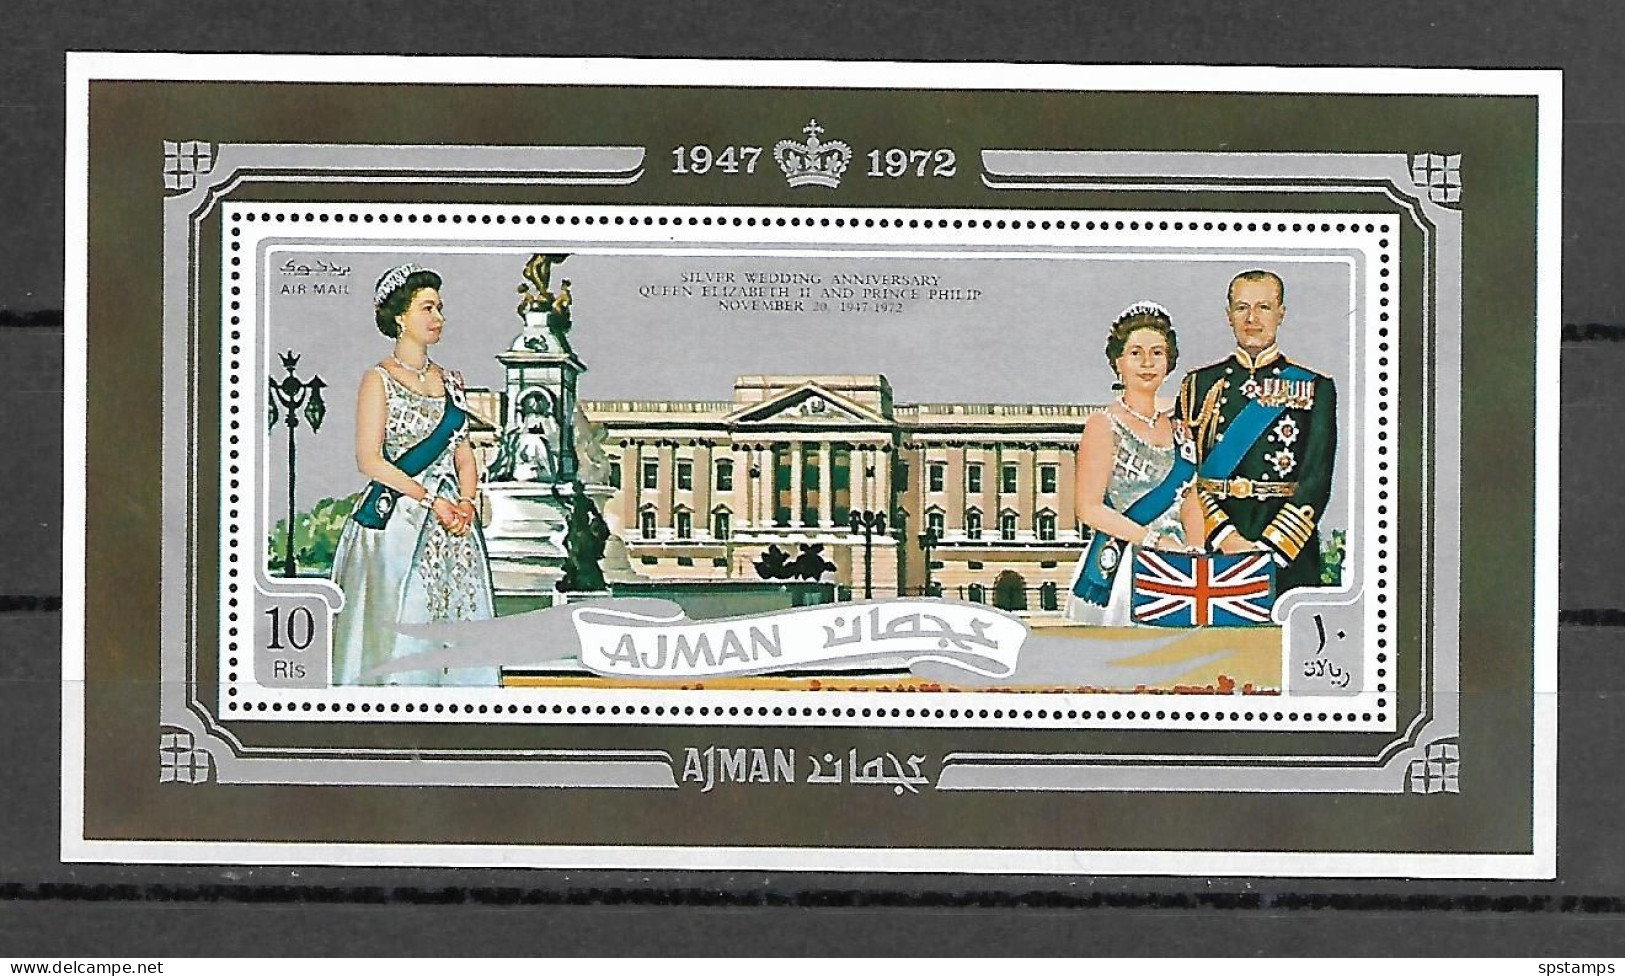 Ajman 1971 The 25th Wedding Anniversary Of Queen Elizabeth II And Prince Philip MS MNH - Royalties, Royals